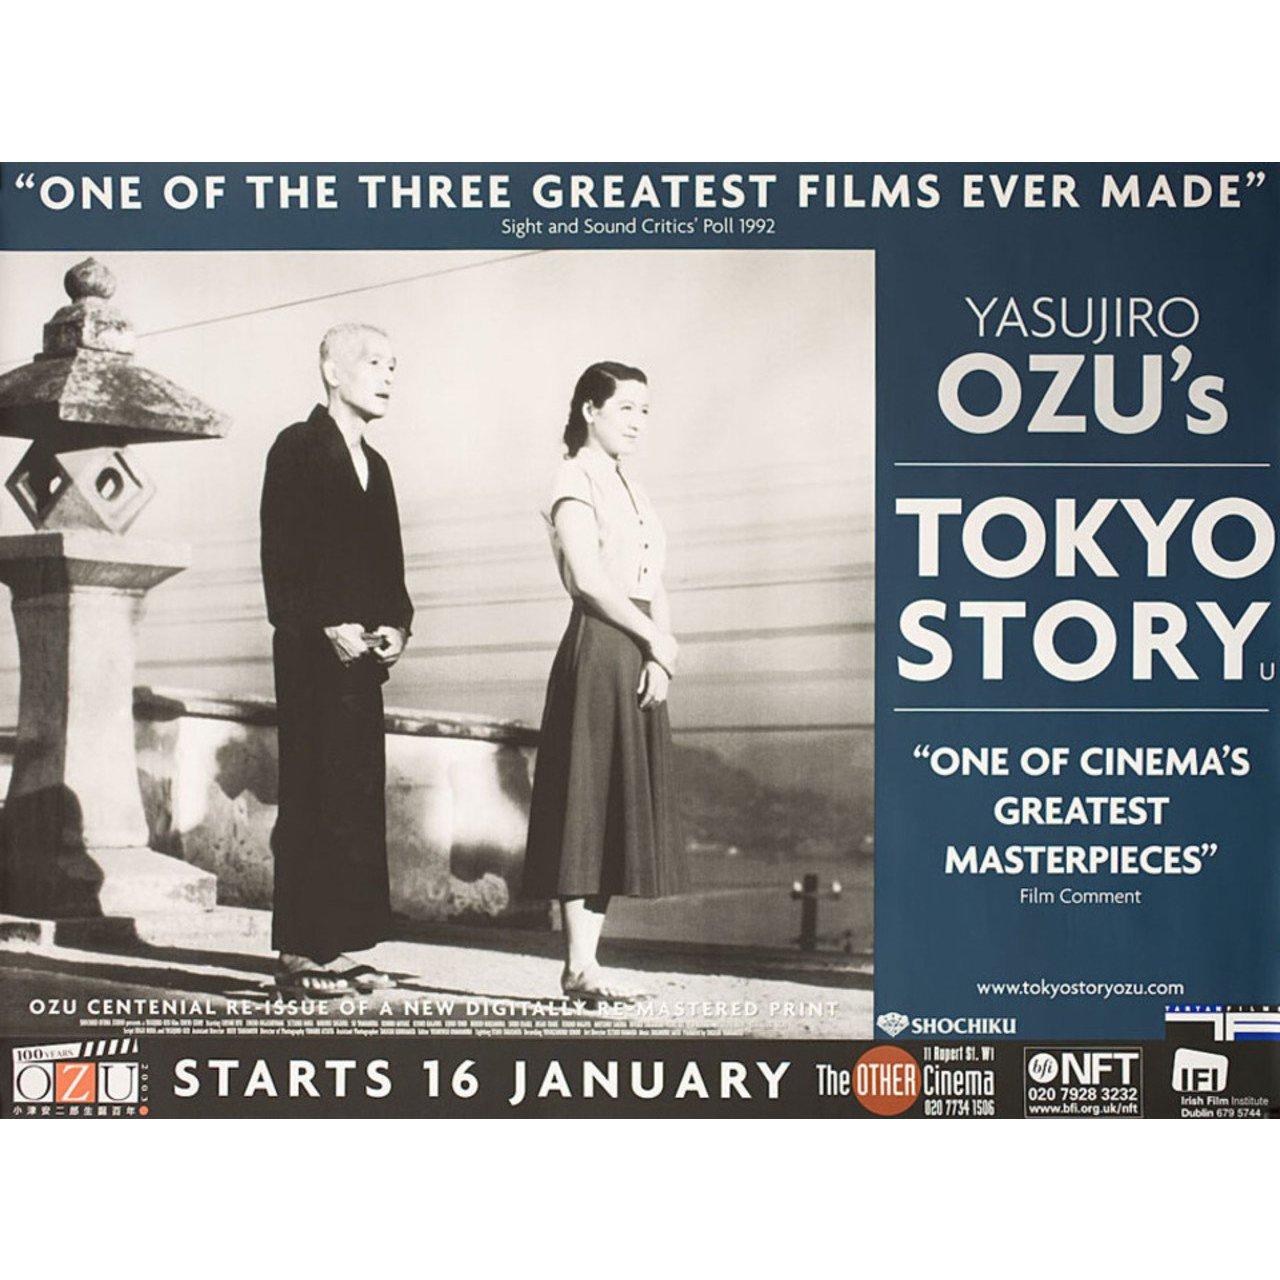 Original 2003 re-release British quad poster for the 1953 film Tokyo Story directed by Yasujiro Ozu with Chishu Ryu / Chieko Higashiyama / Setsuko Hara / Haruko Sugimura. Fine condition, rolled. Please note: the size is stated in inches and the